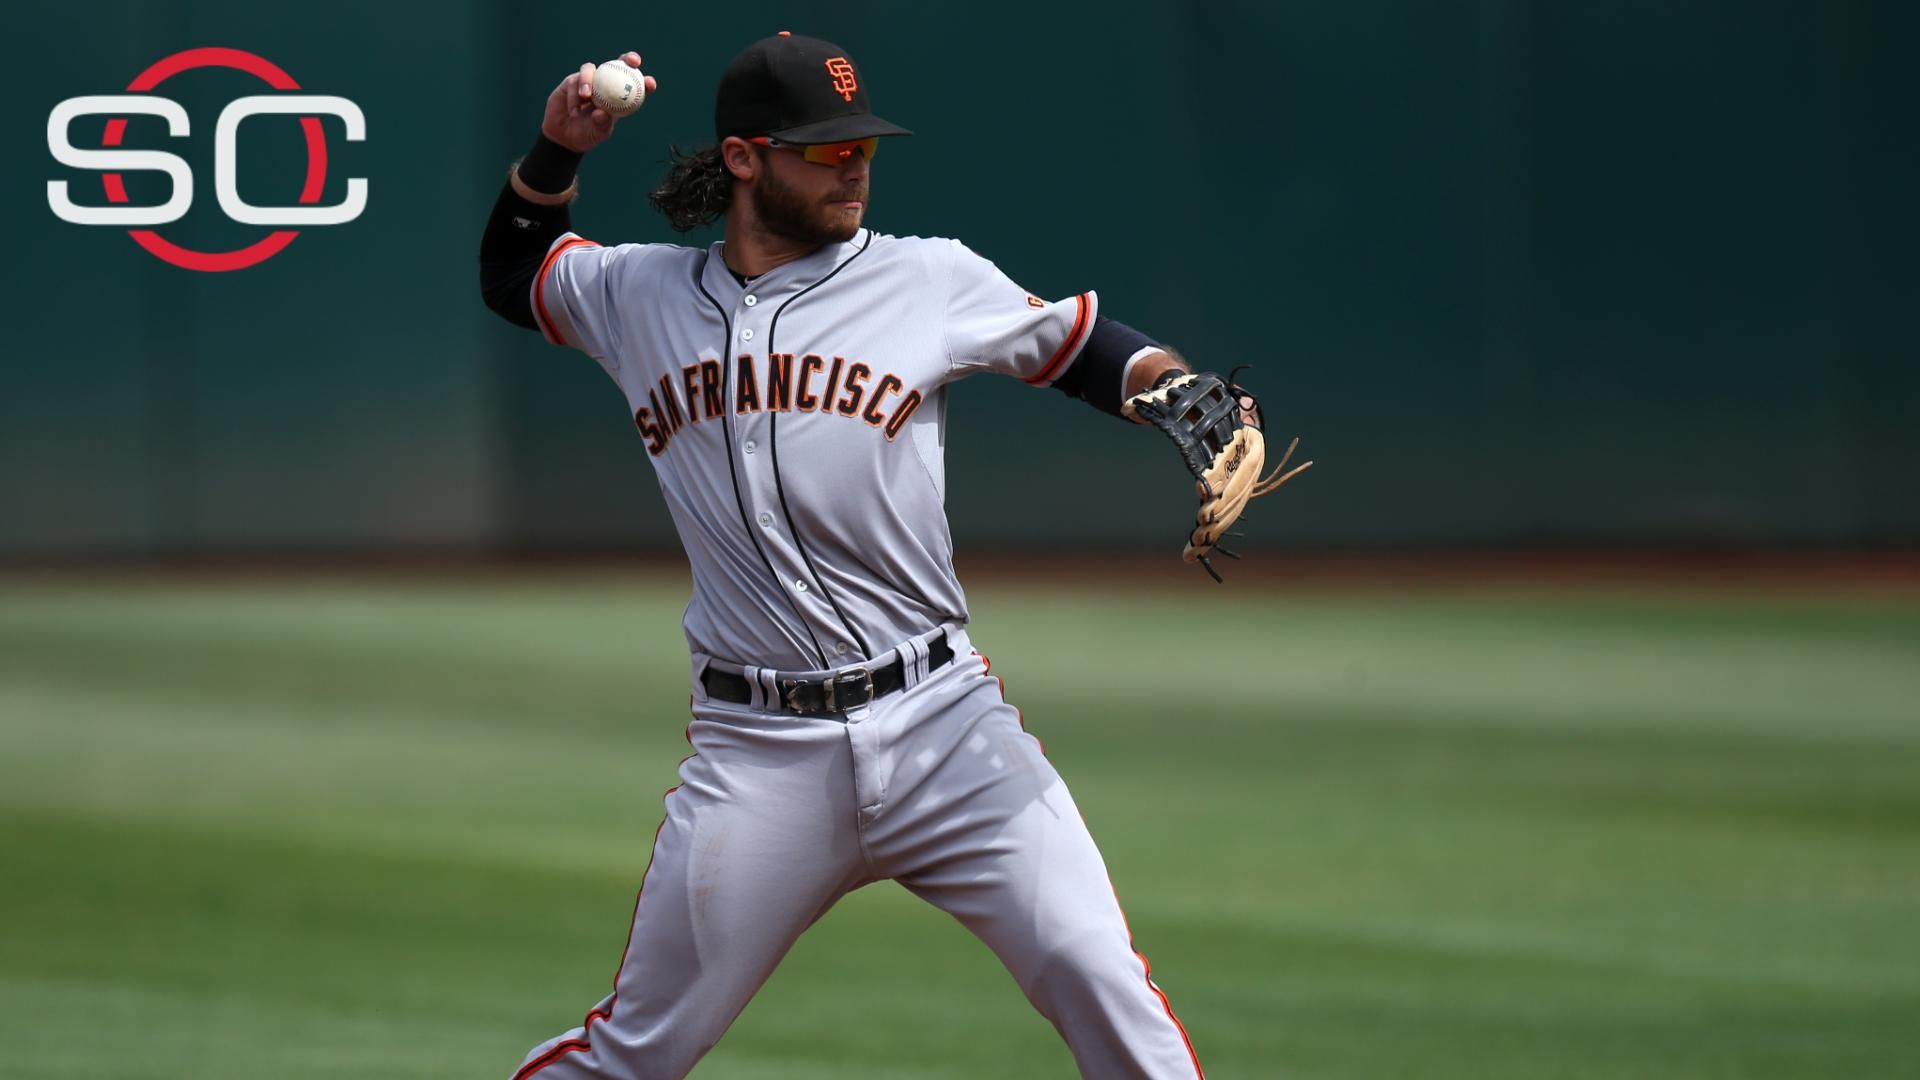 Giants sign Brandon Crawford to new, $75M contract - ABC7 San Francisco